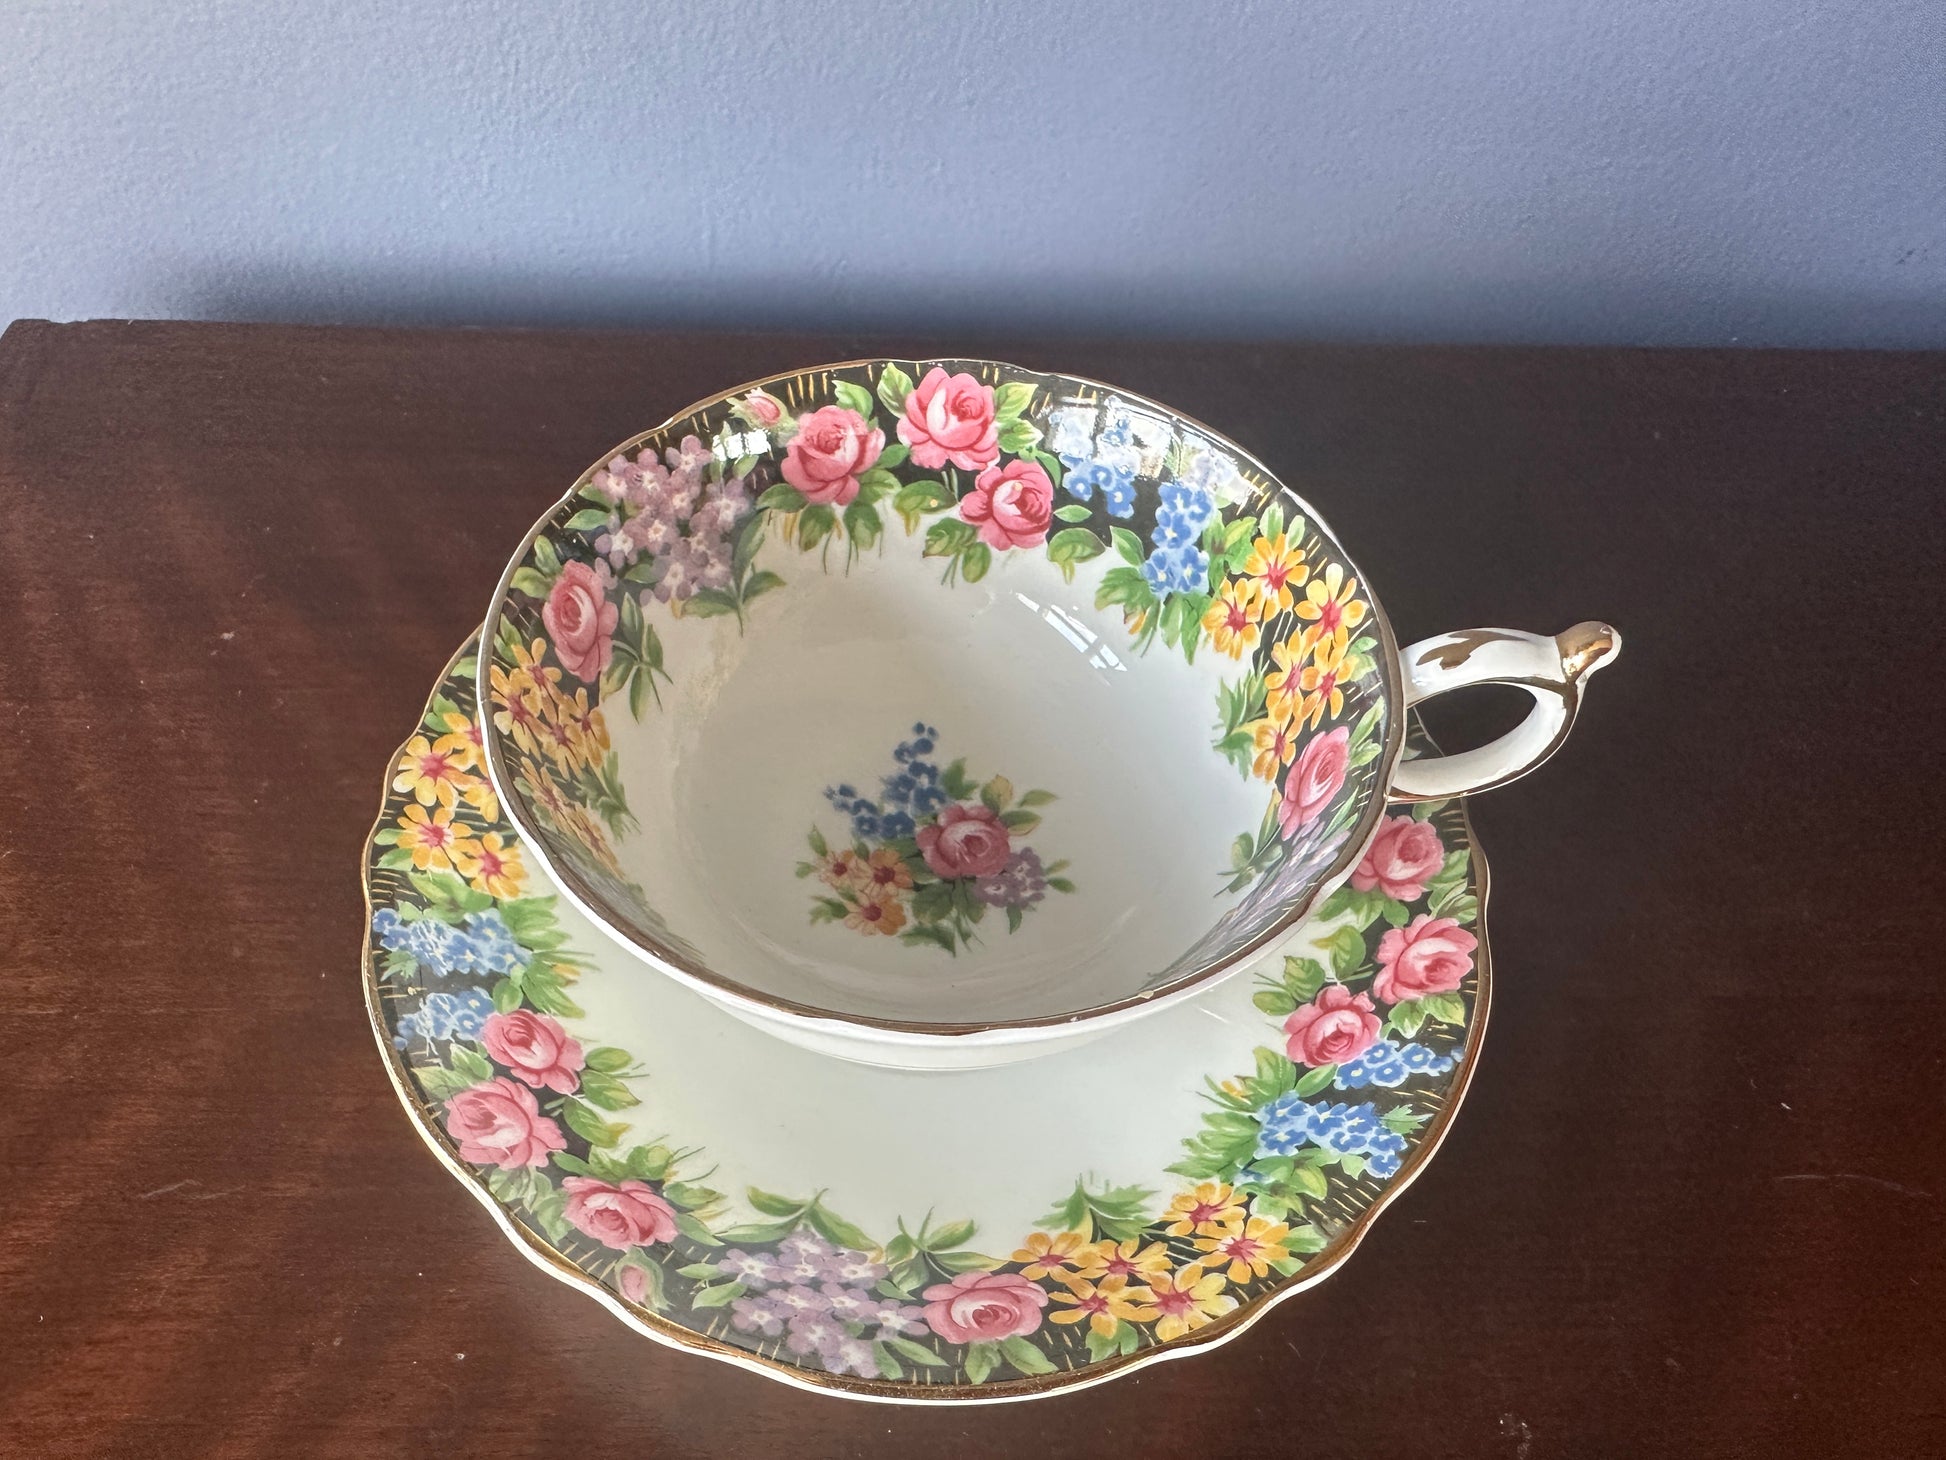 Paragon Double-Warranted Old English Garden Teacup and Saucer